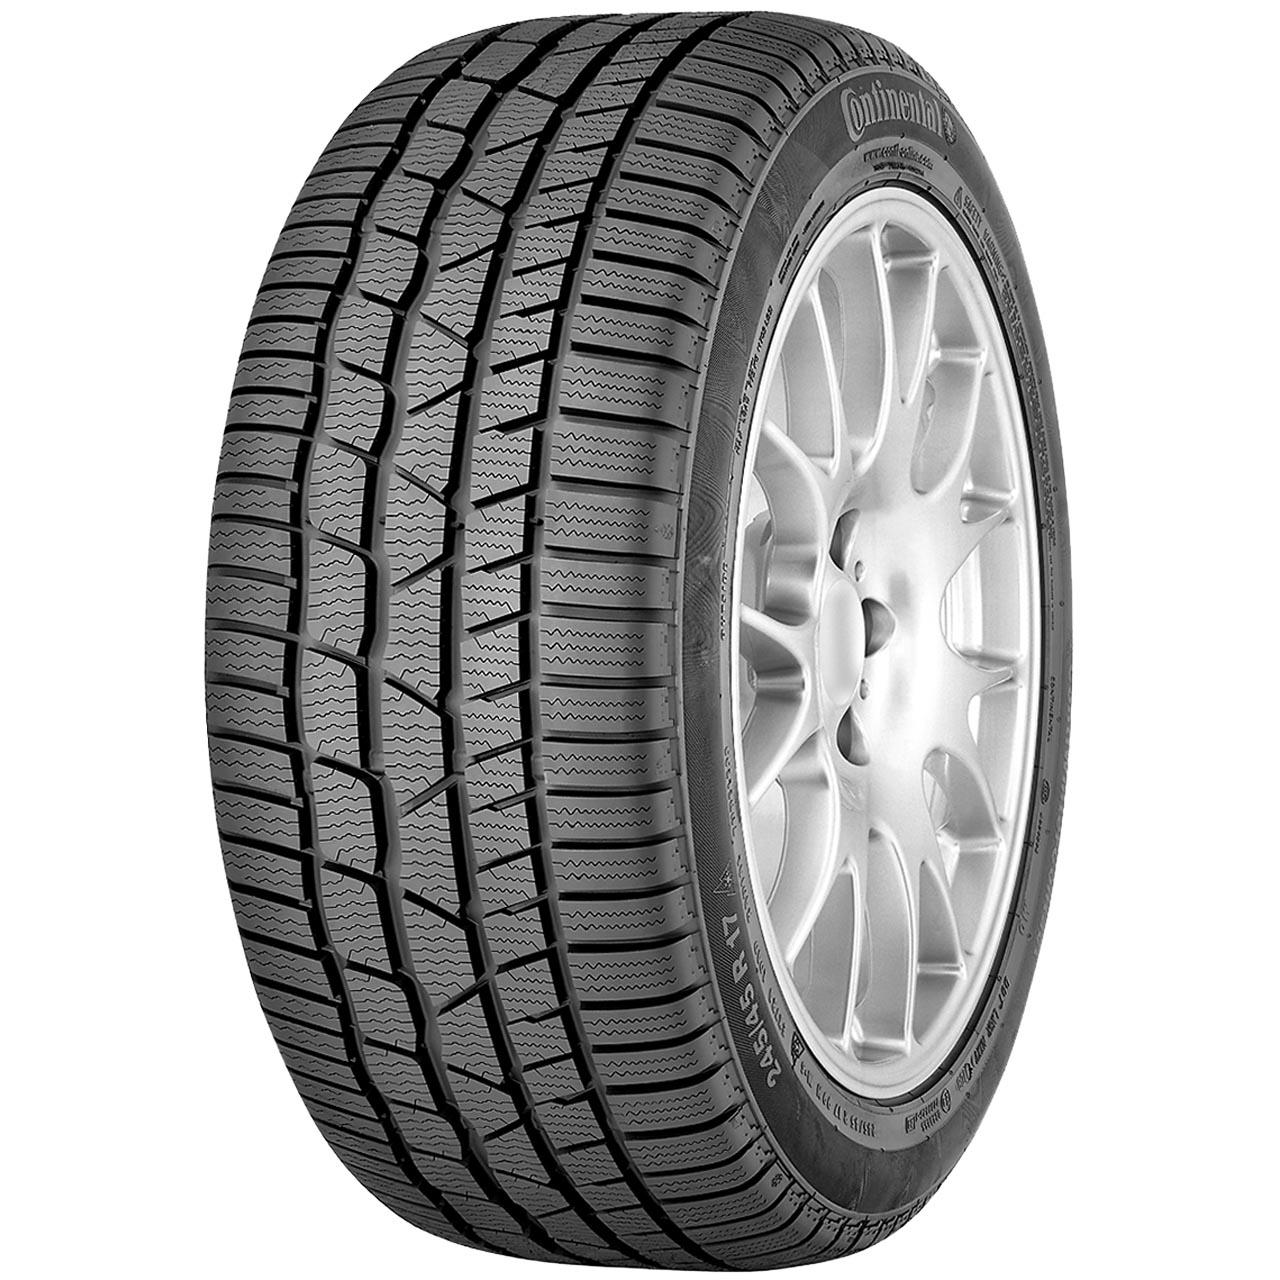 Continental CONTIWINTERCONTACT TS 830 P 225/50R16 92H